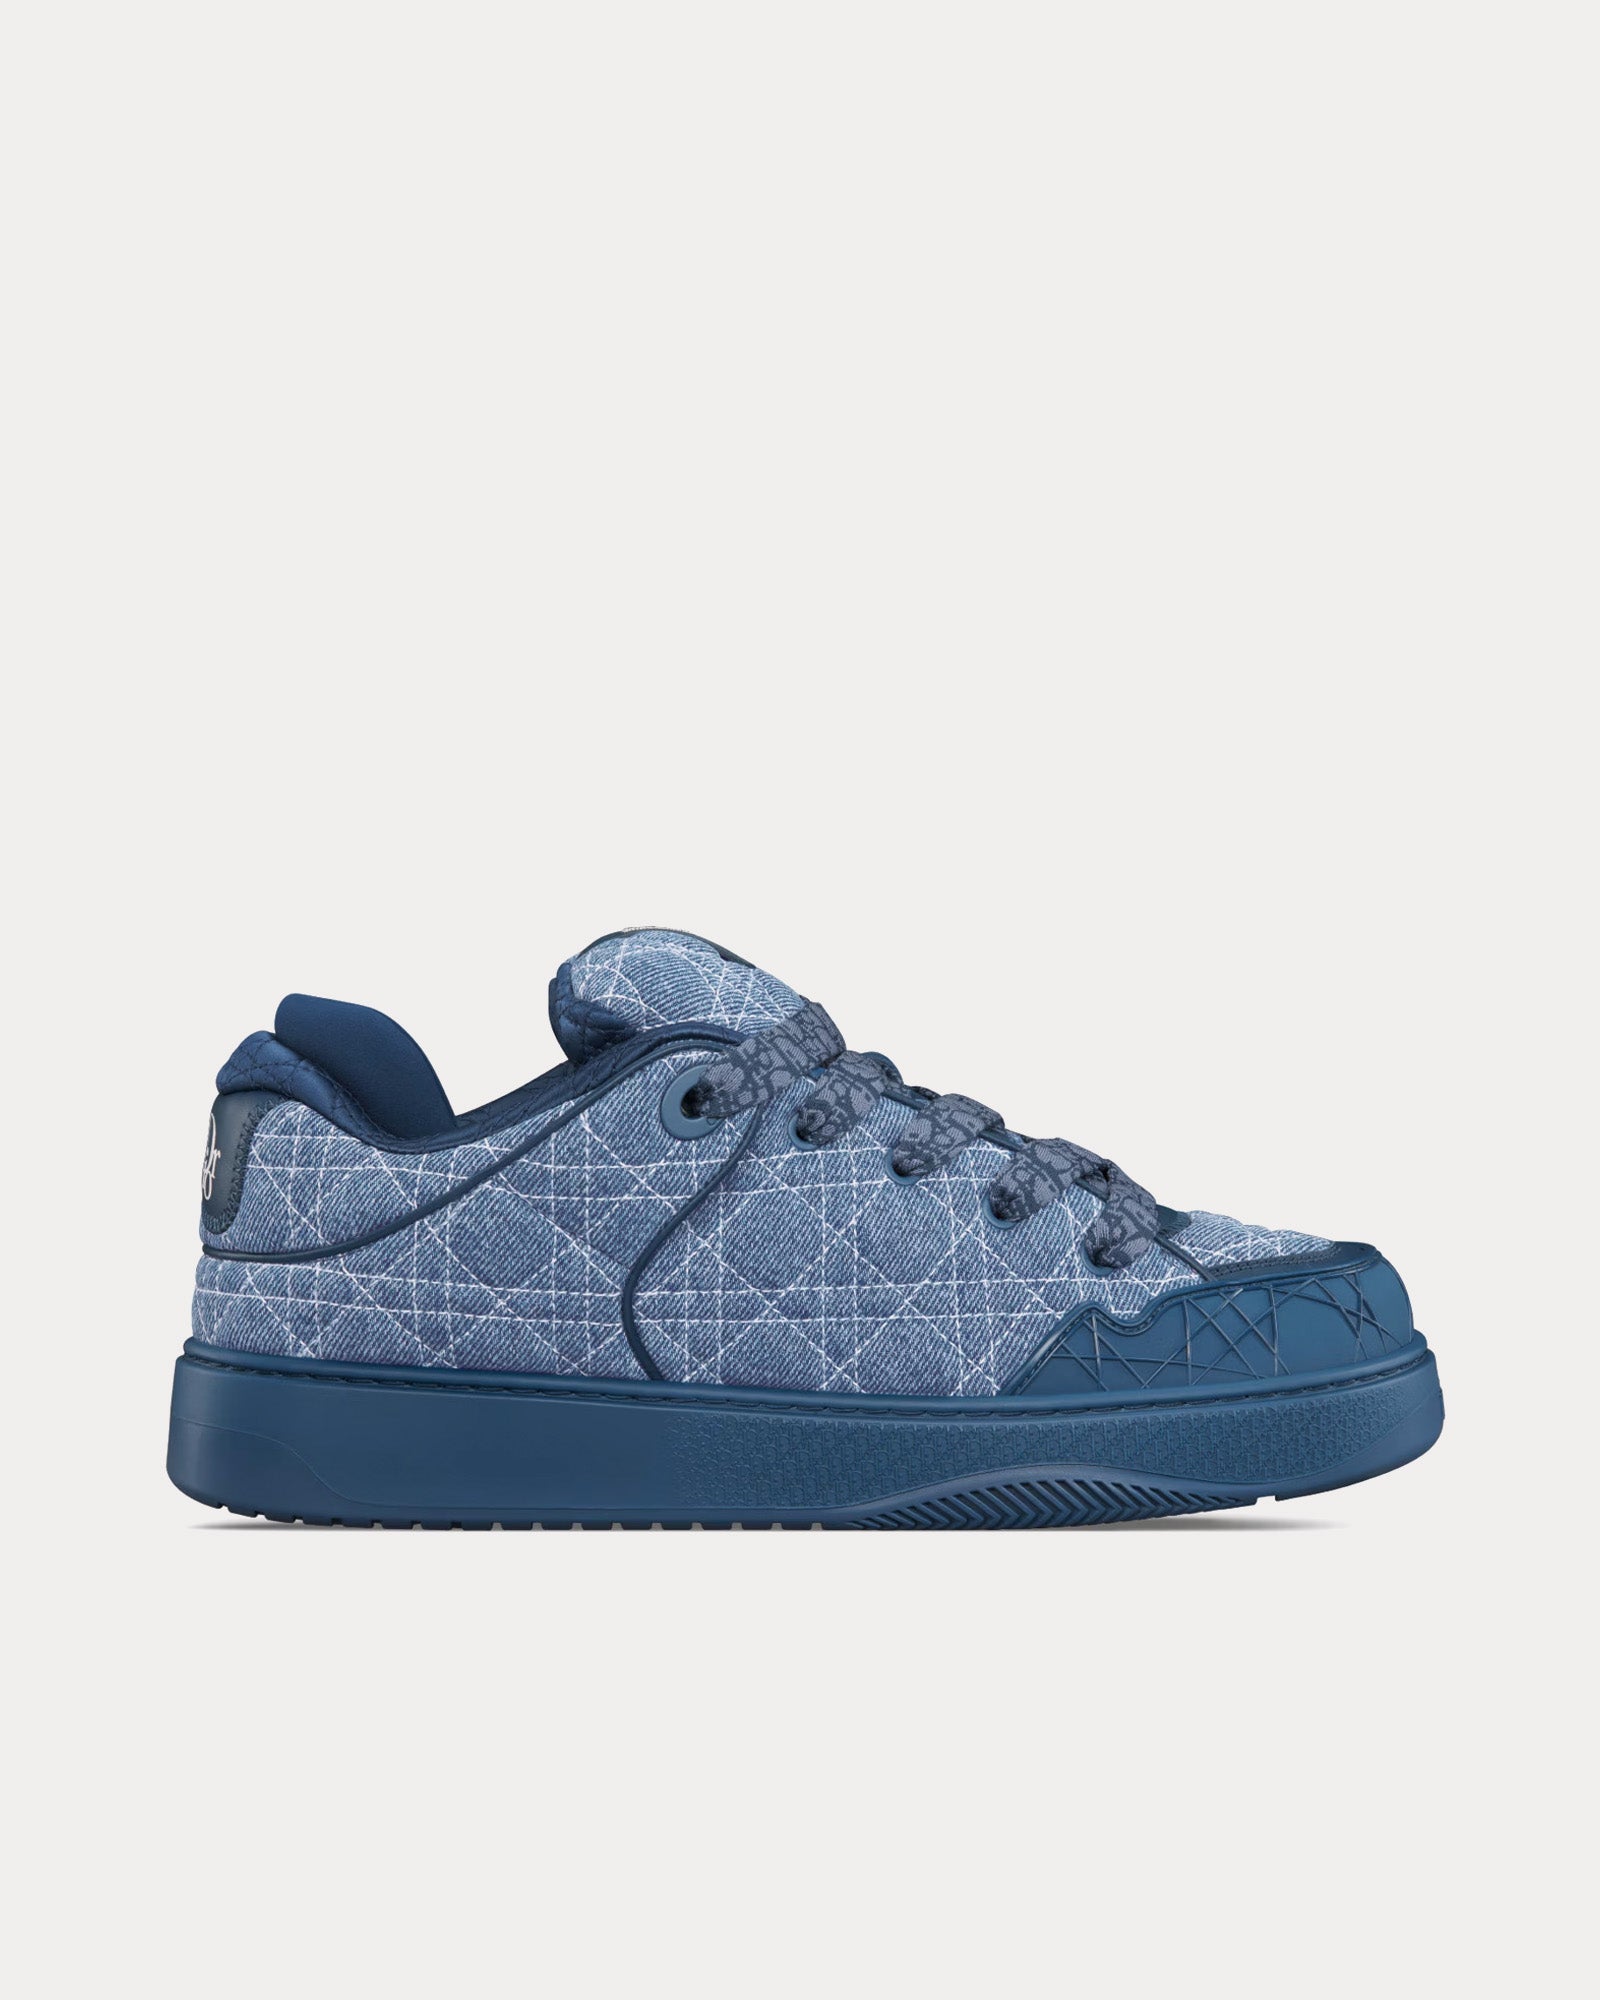 Dior - B9S Skater Limited And Numbered Edition Kumo Cannage Denim Blue Low Top Sneakers